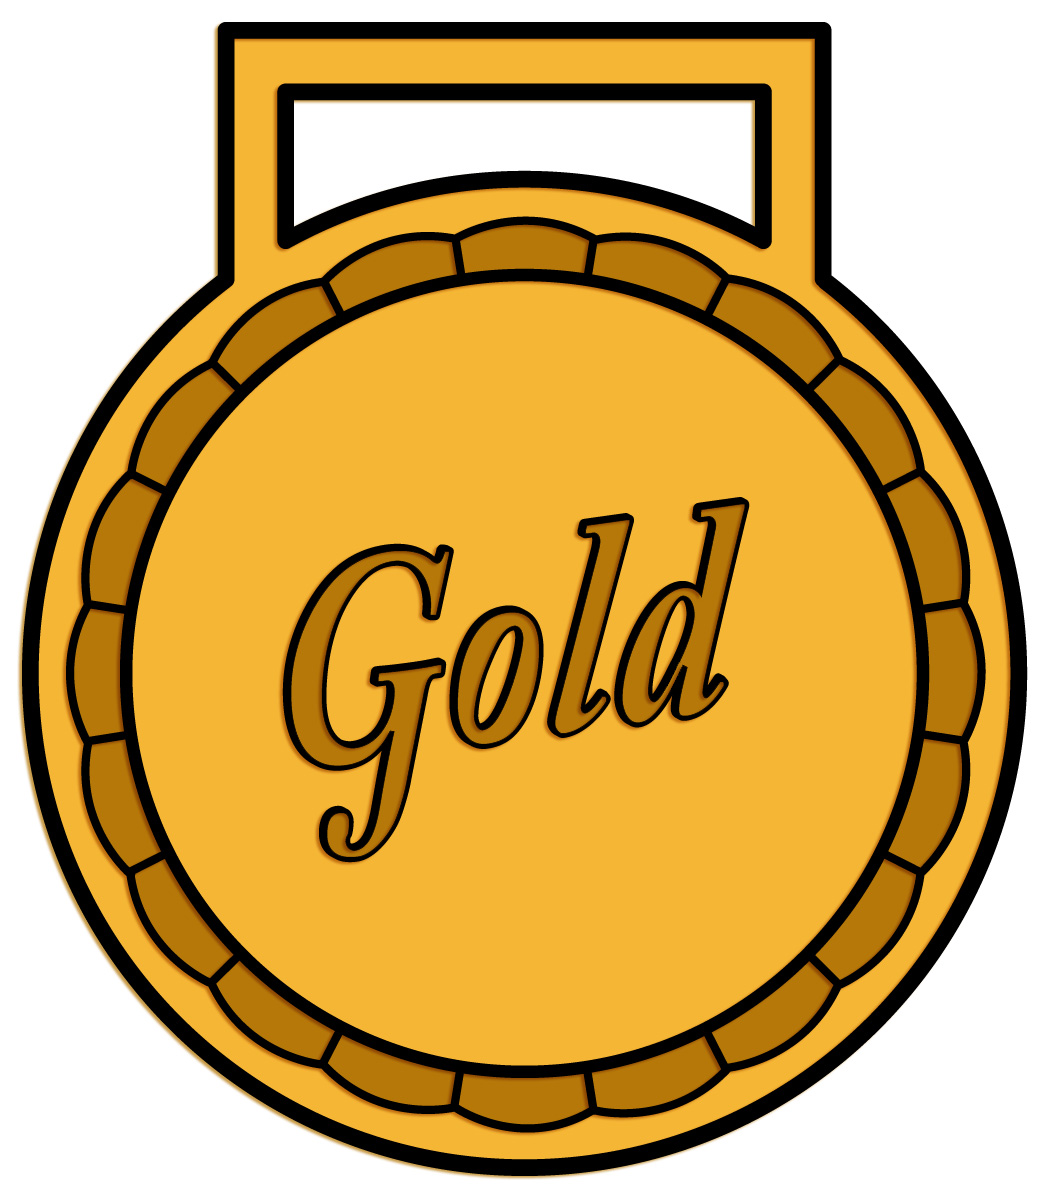 54 Images Of Gold Medal Clipart You Can Use These Free Cliparts For